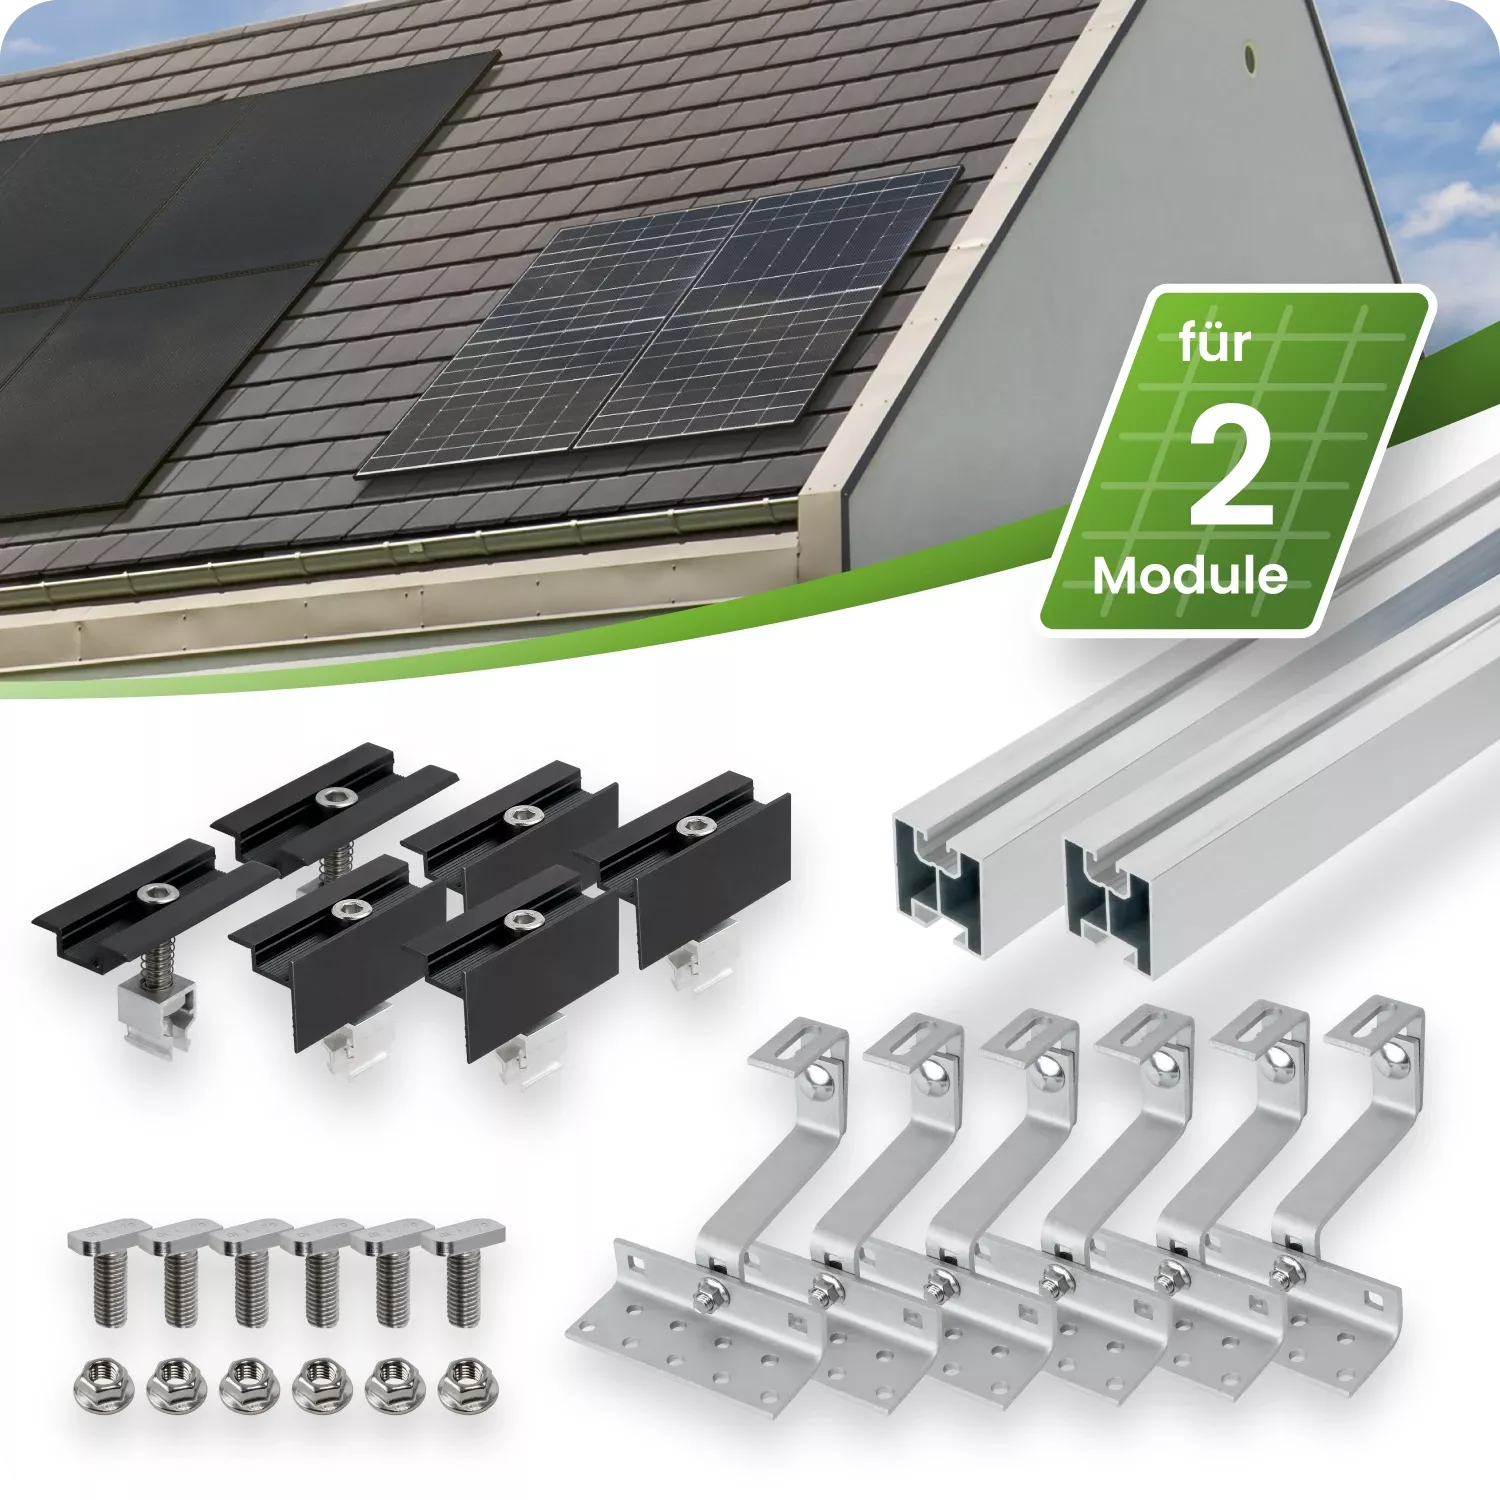 Mounting set pitched roof (for 2 modules) - CLIP'N'SHADE